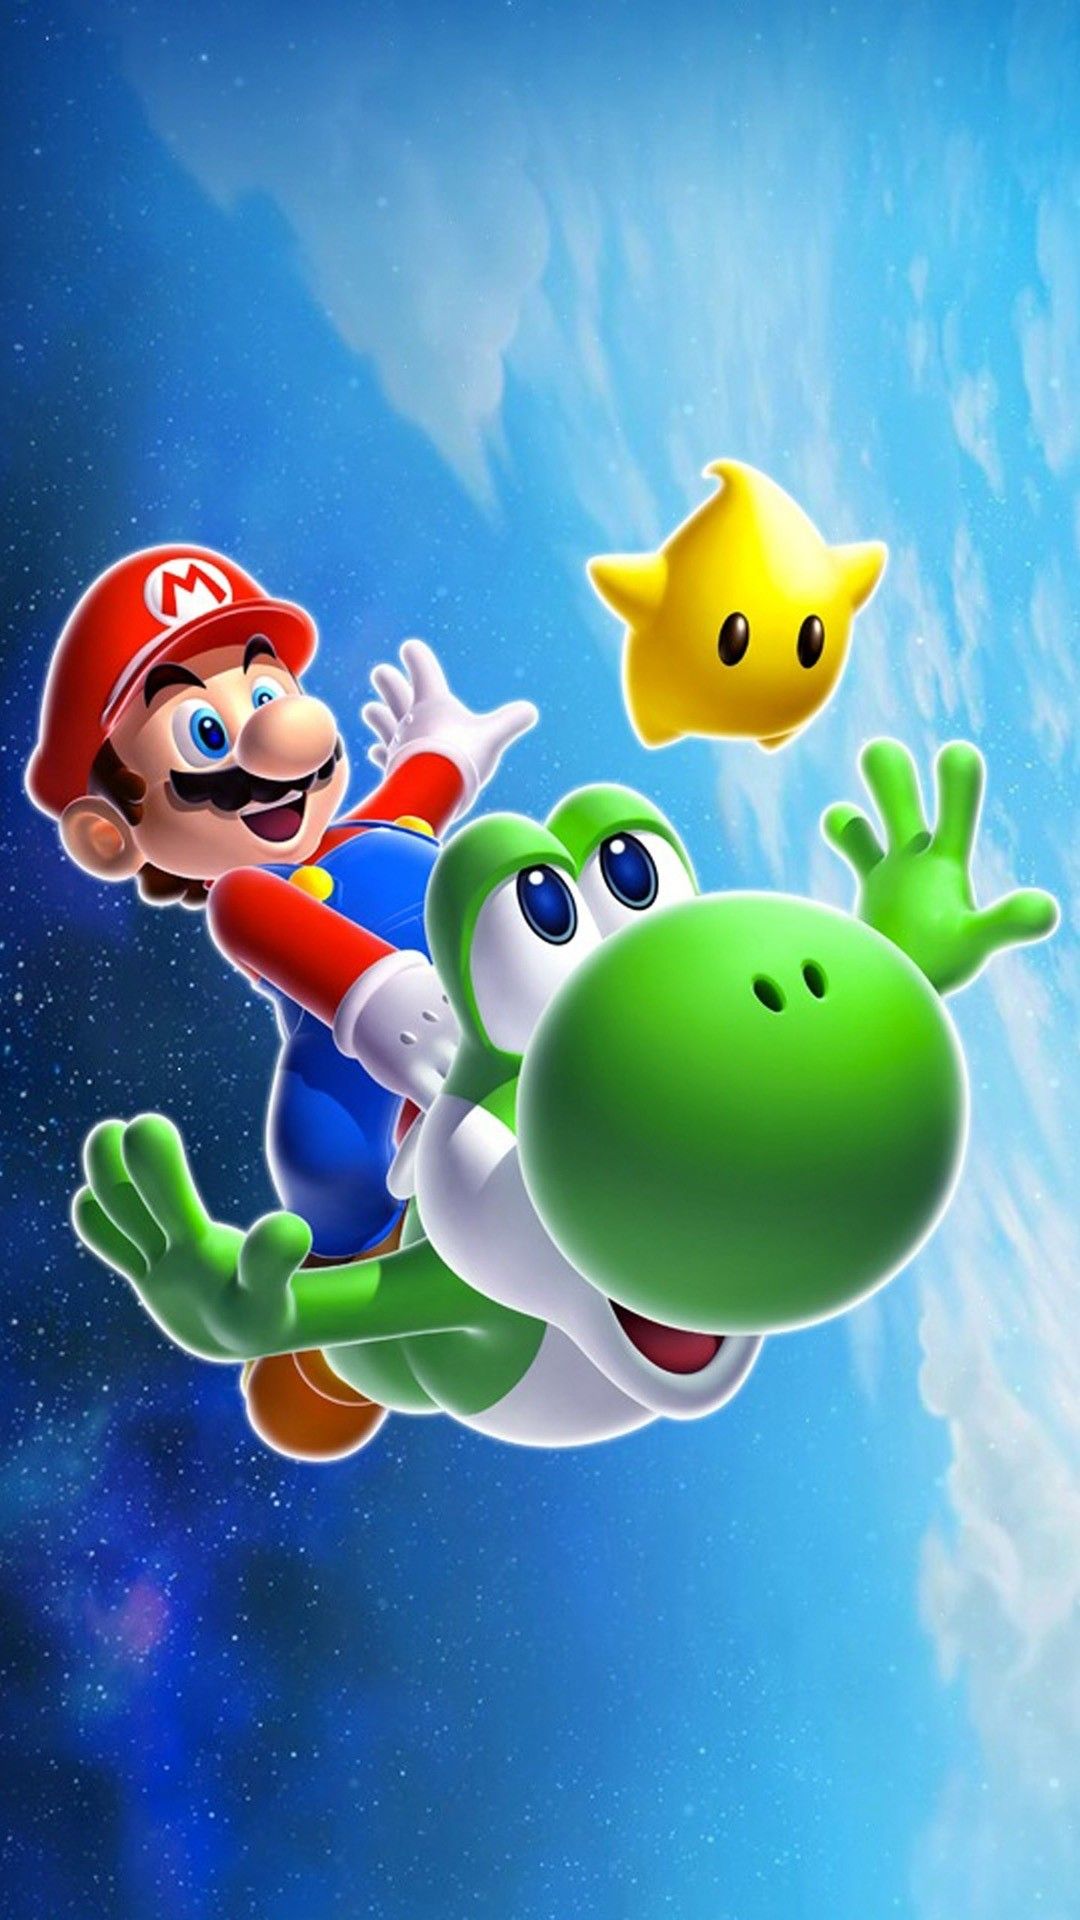 Super Mario Android Wallpapers - Wallpaper Cave